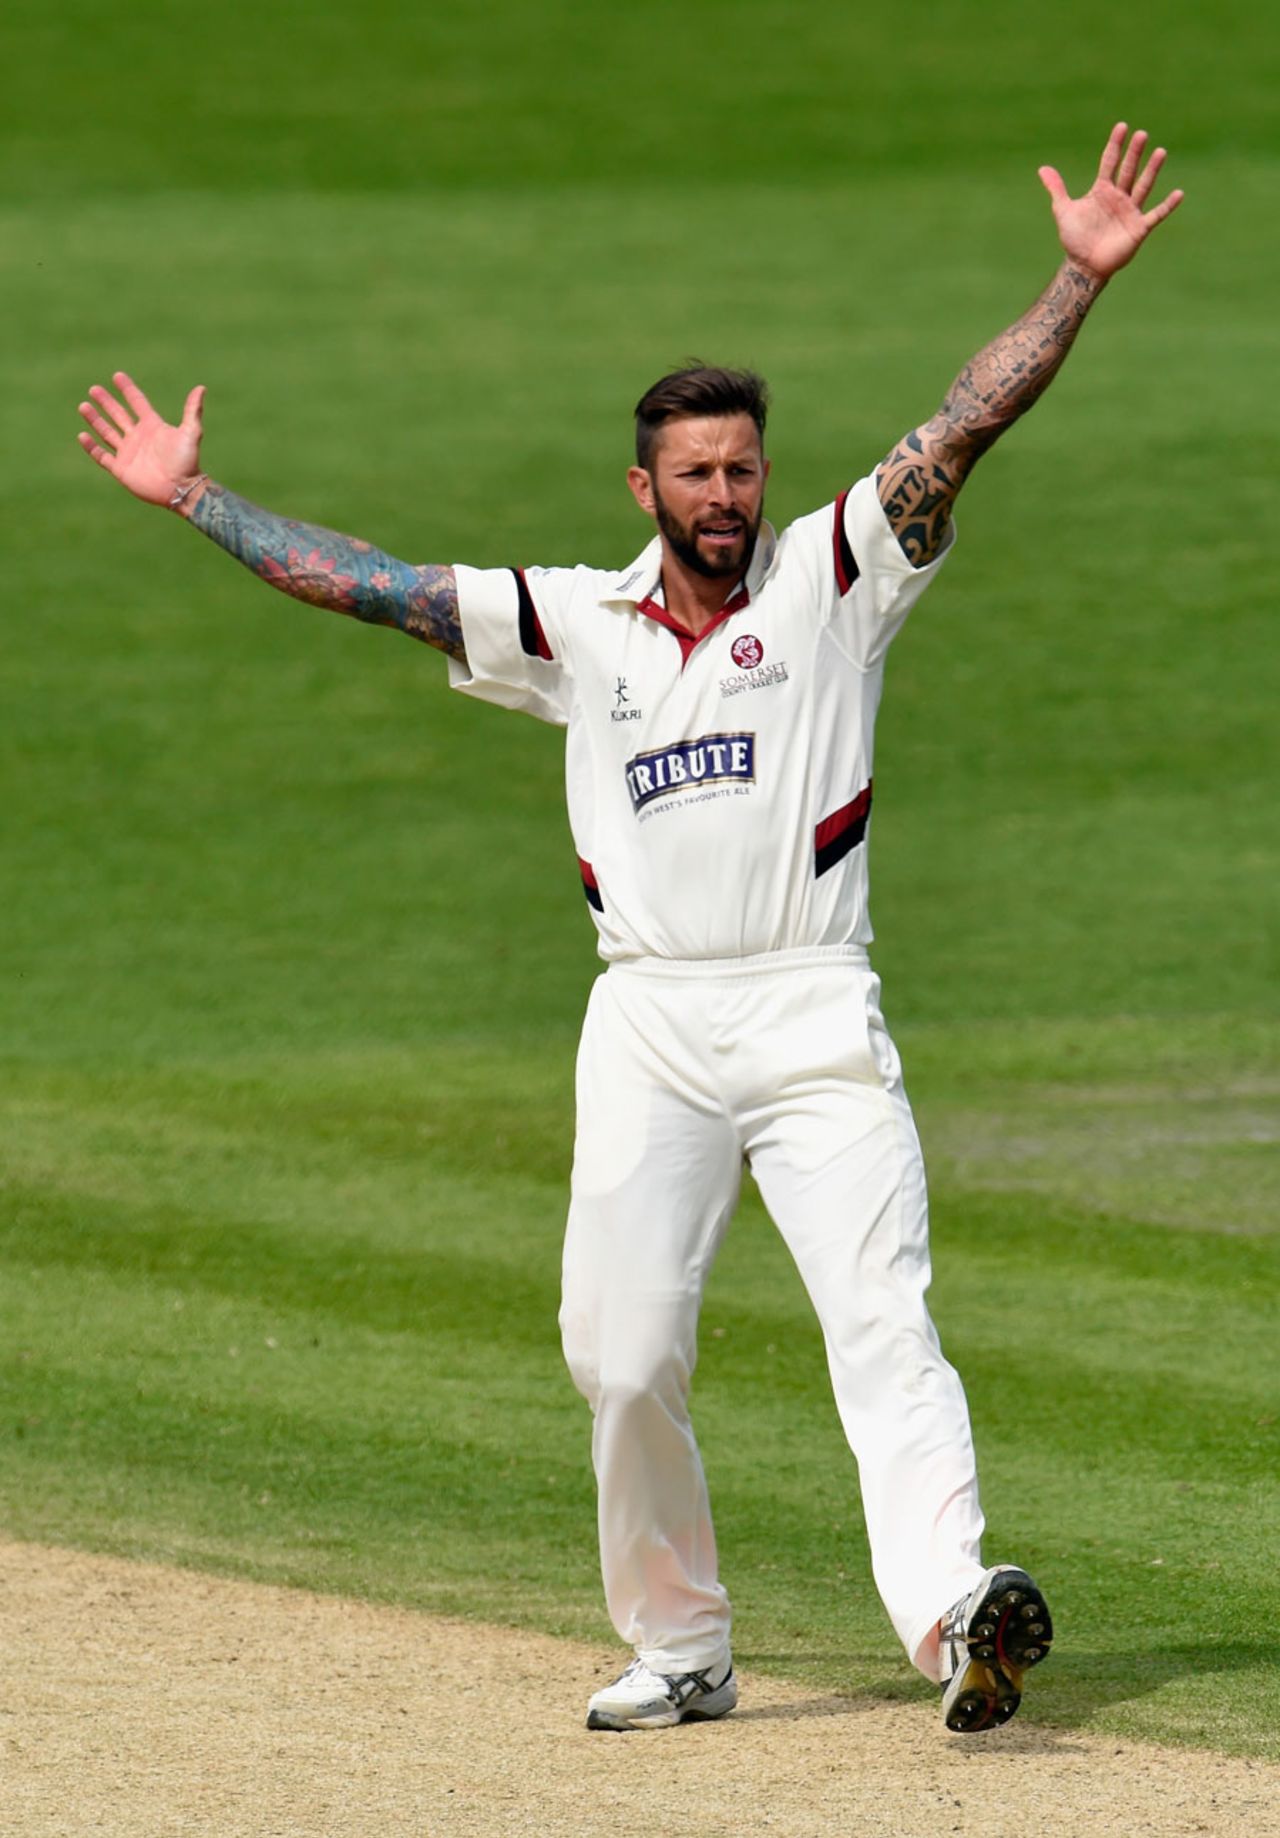 Peter Trego's two wickets put Somerset on top, Worcestershire v Somerset, County Championship Division One, New Road, 2nd day, May 4, 2015